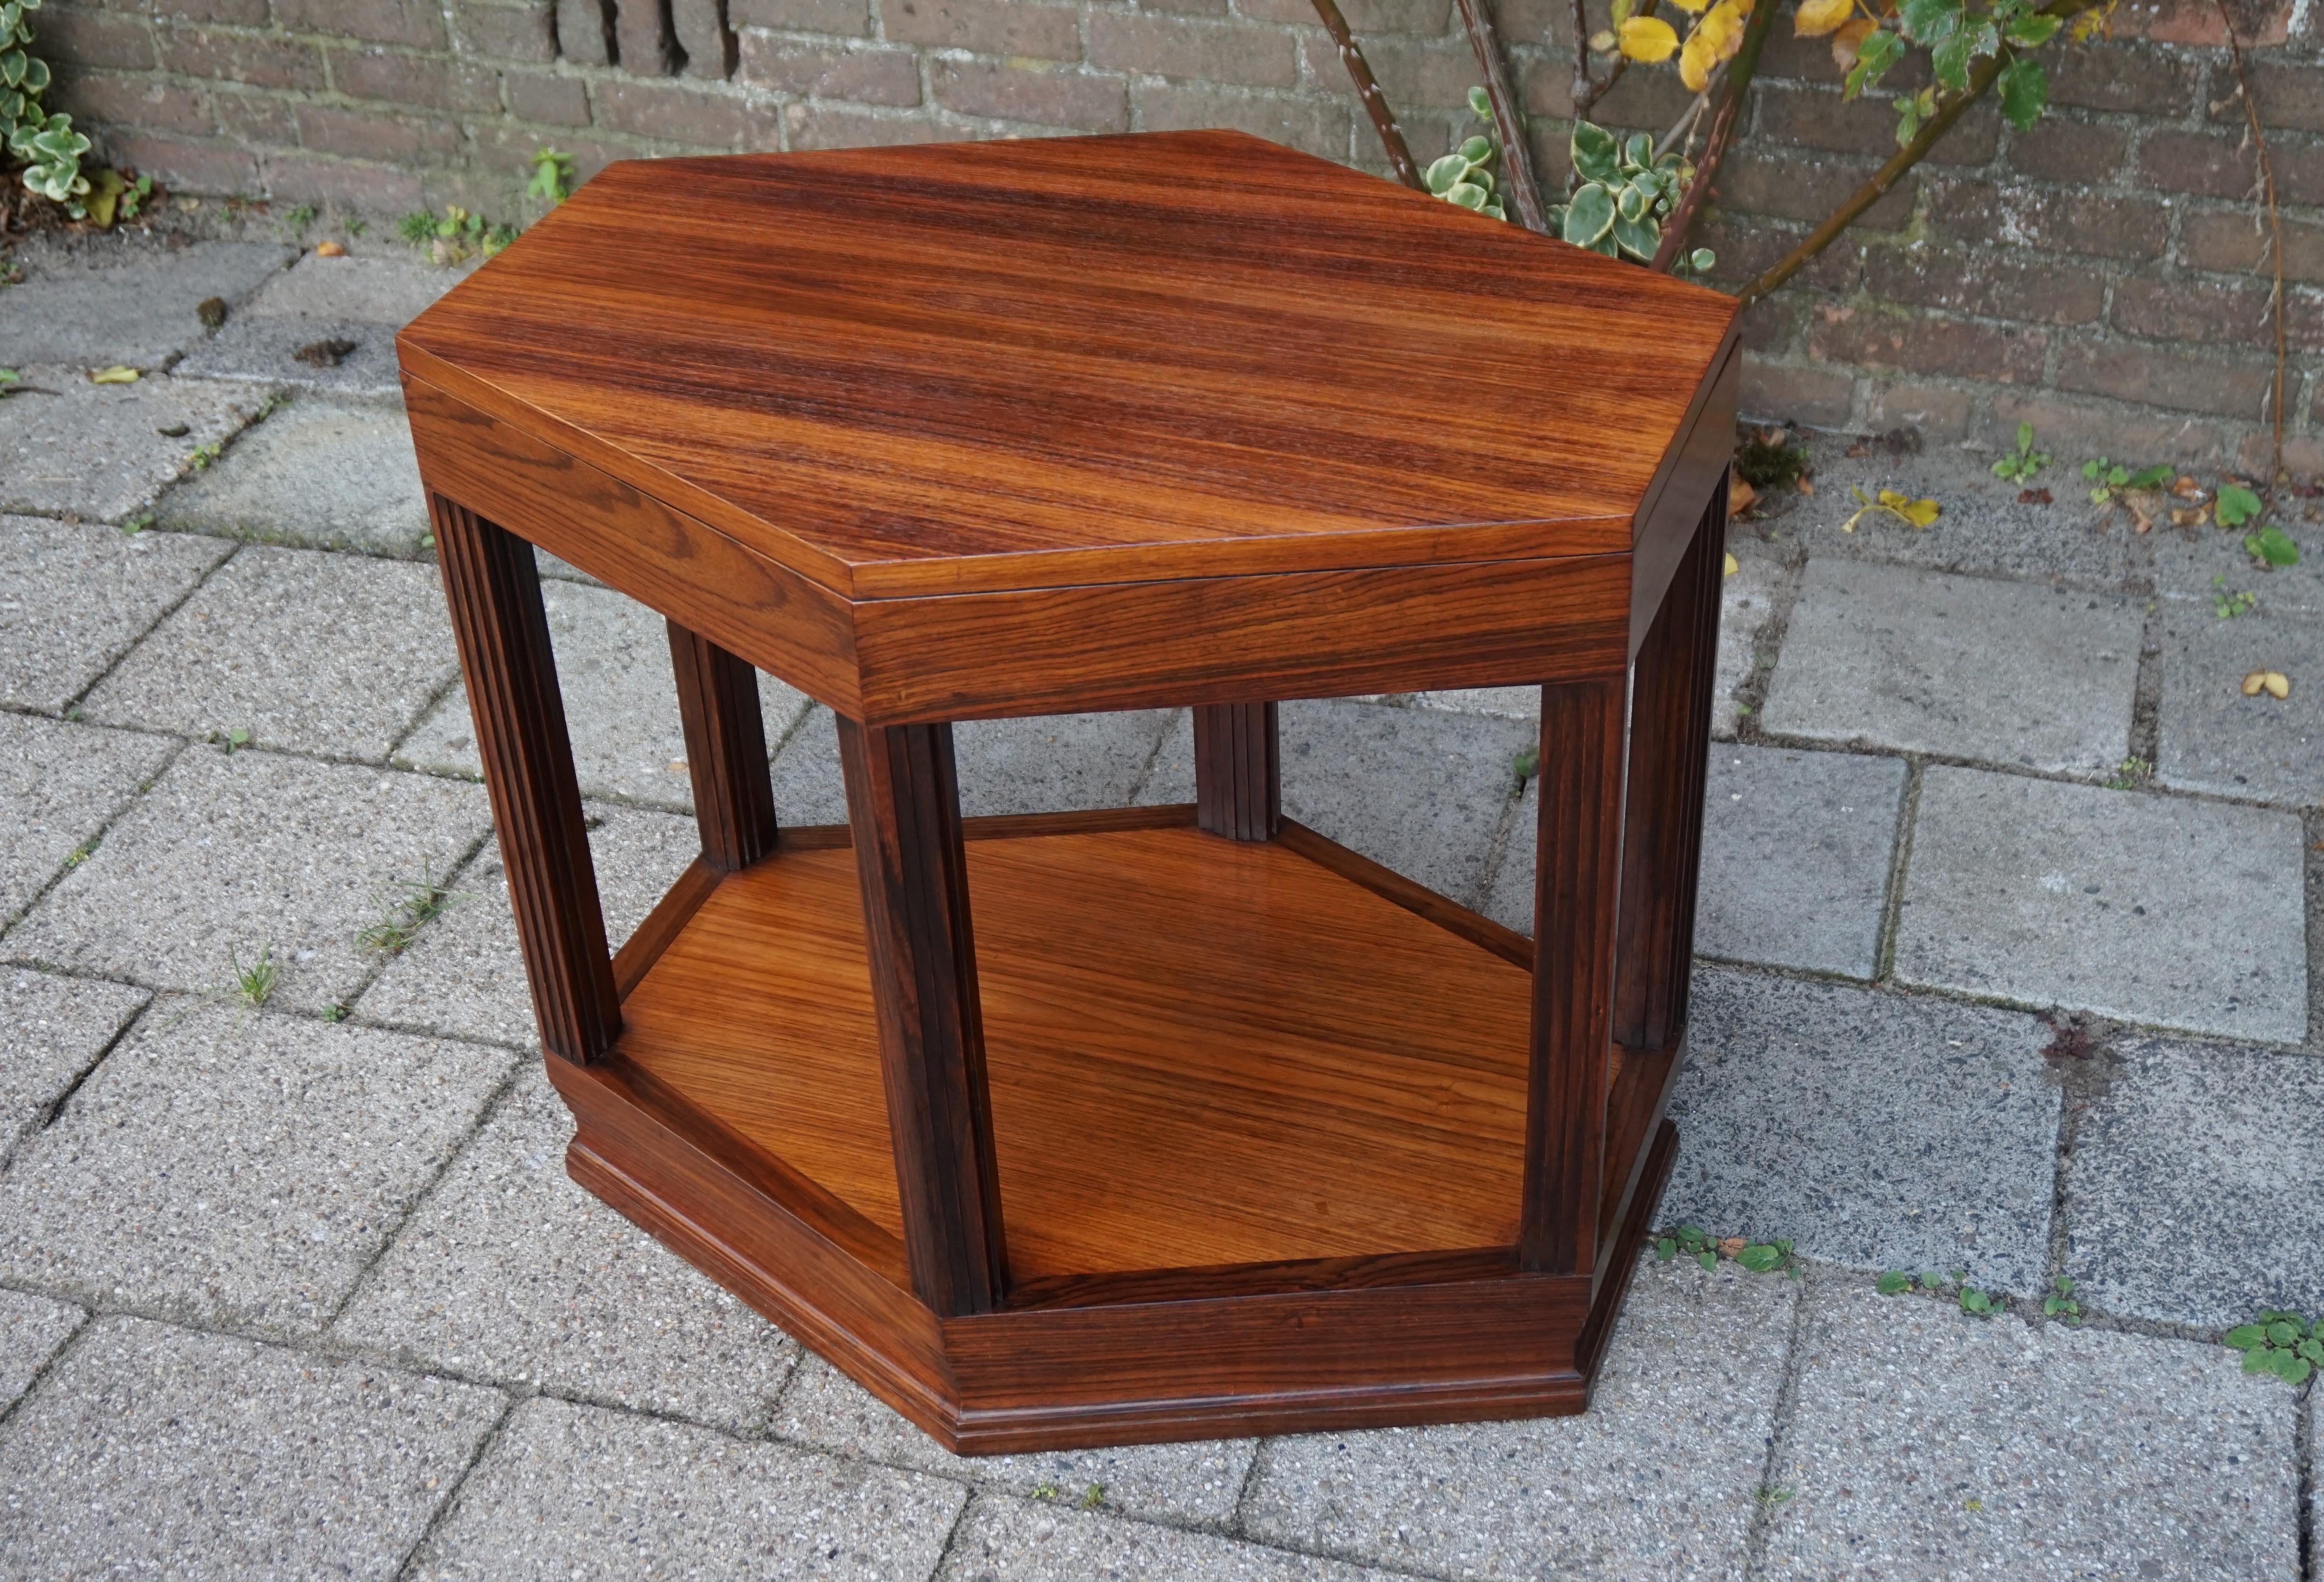 Stunning and Excellent Condition Coromandel Art Deco Coffee or Sofa Table 1920 For Sale 1